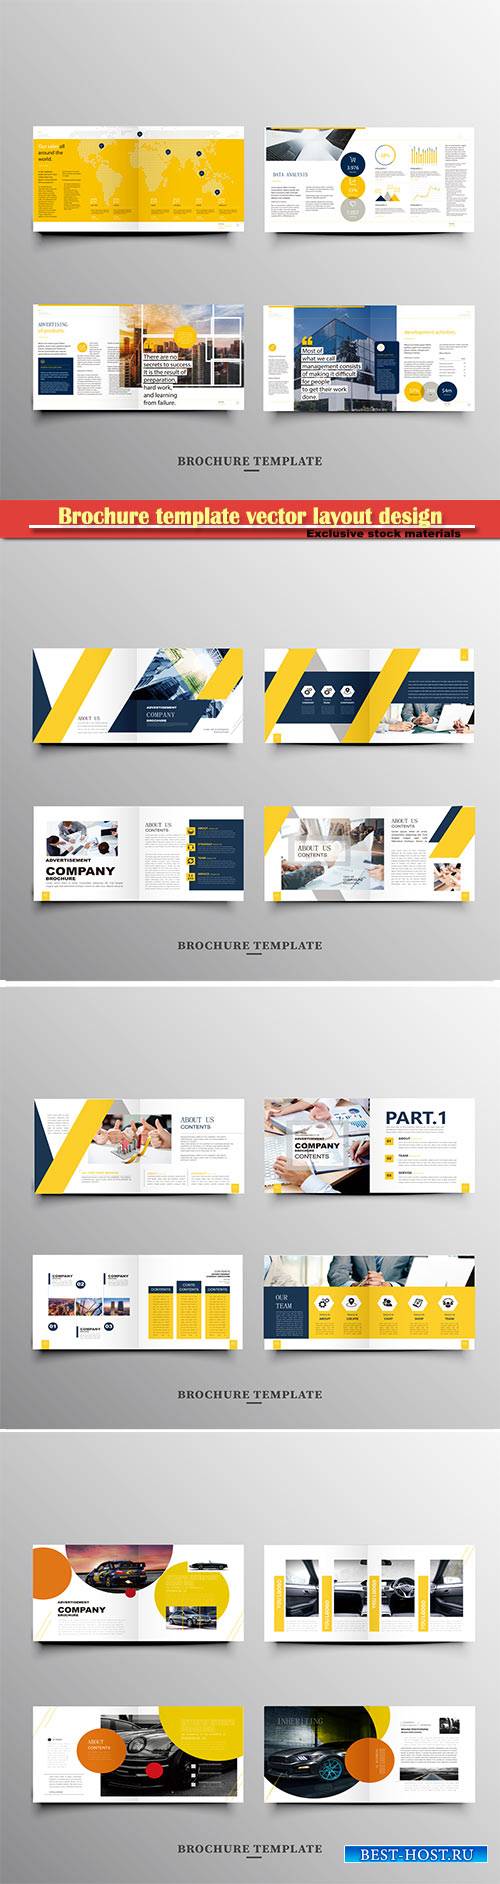 Brochure template vector layout design, corporate business annual report, magazine, flyer mockup # 249